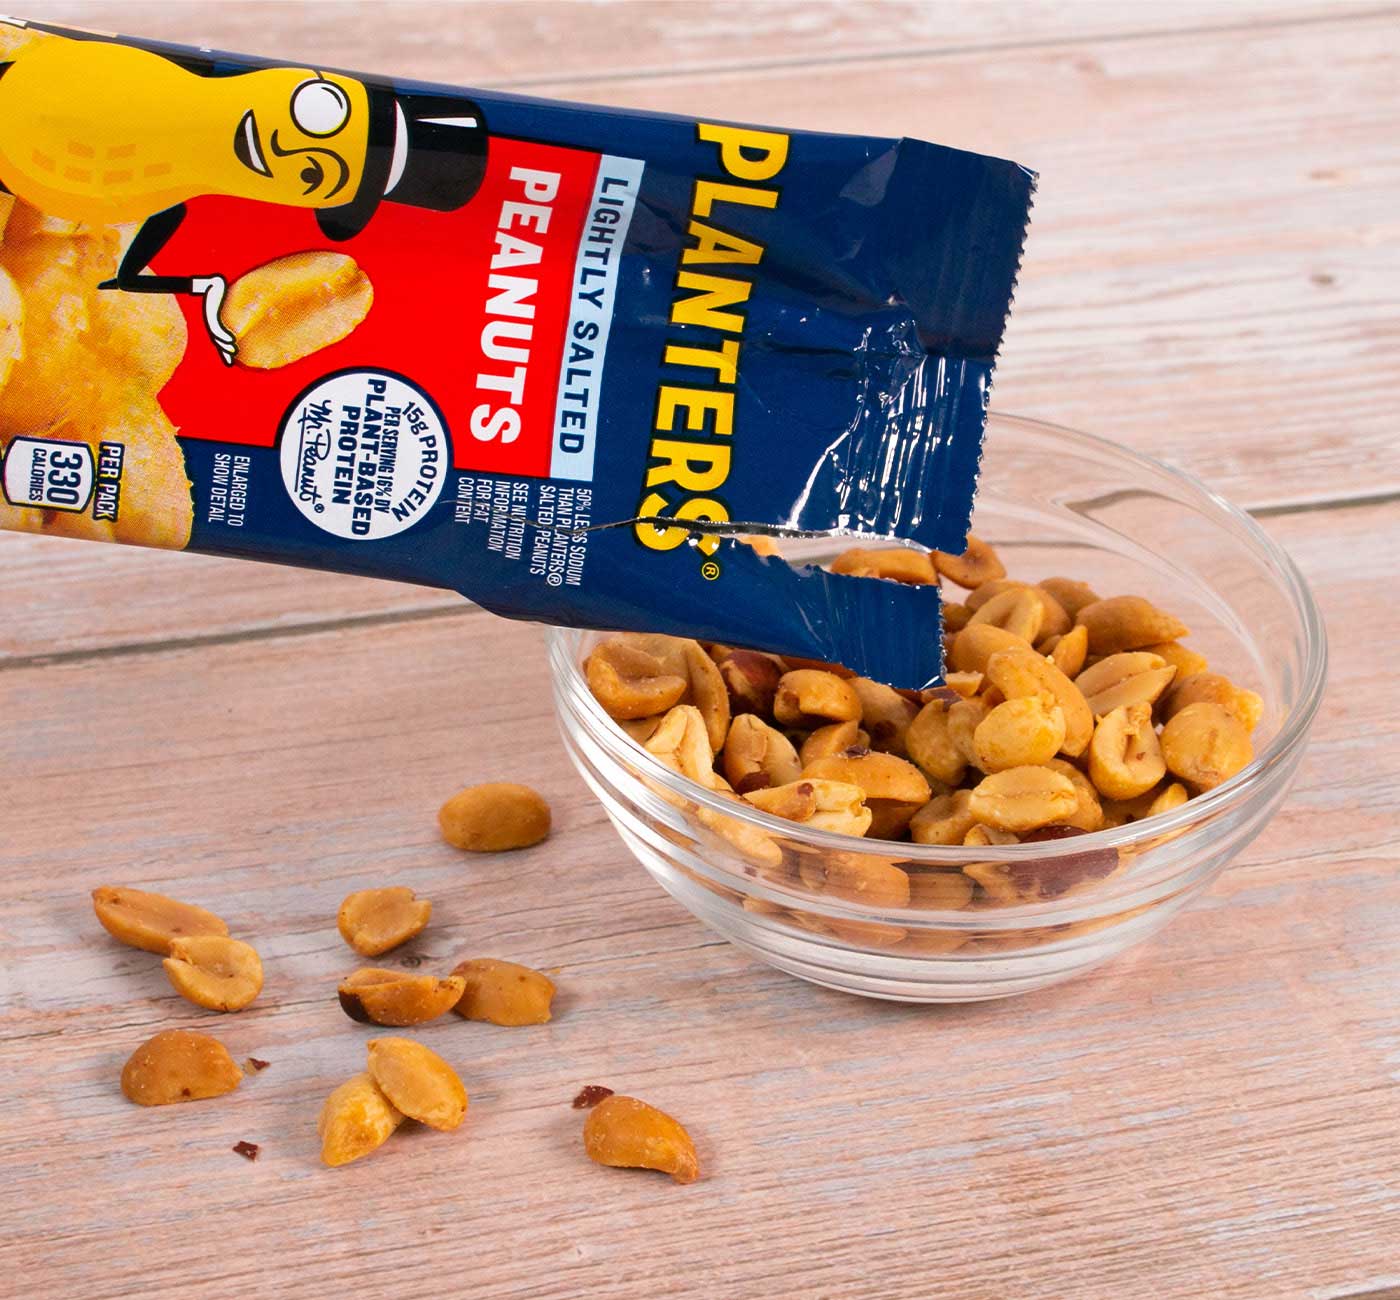 Planters Lightly Salted Cocktail Peanuts Case